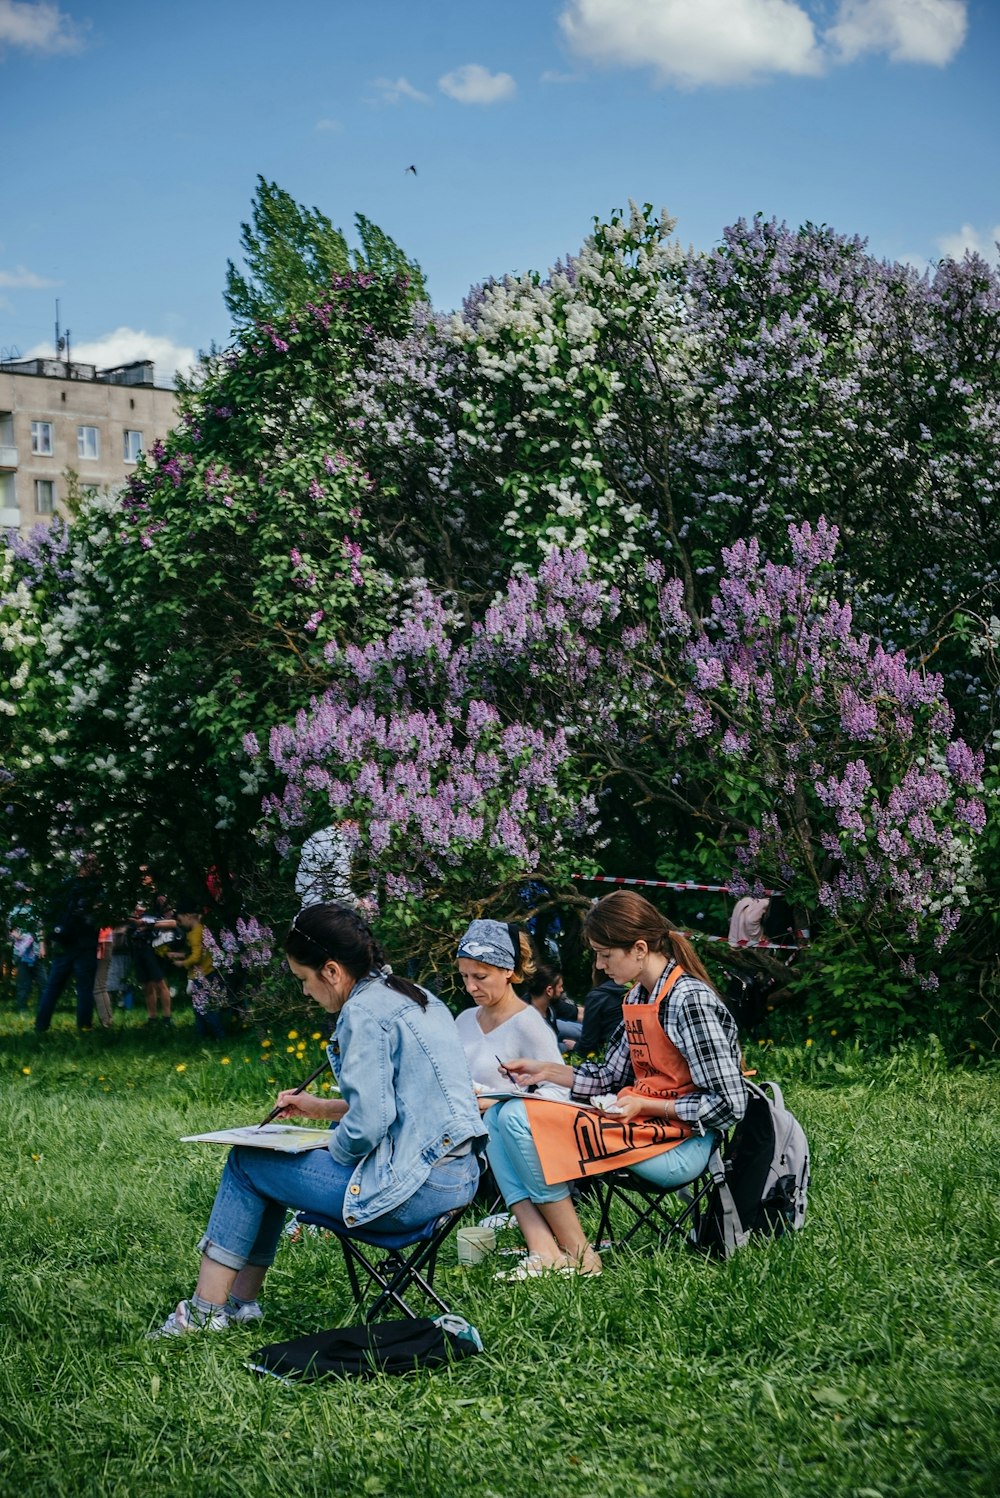 people sitting on bench under green tree during daytime